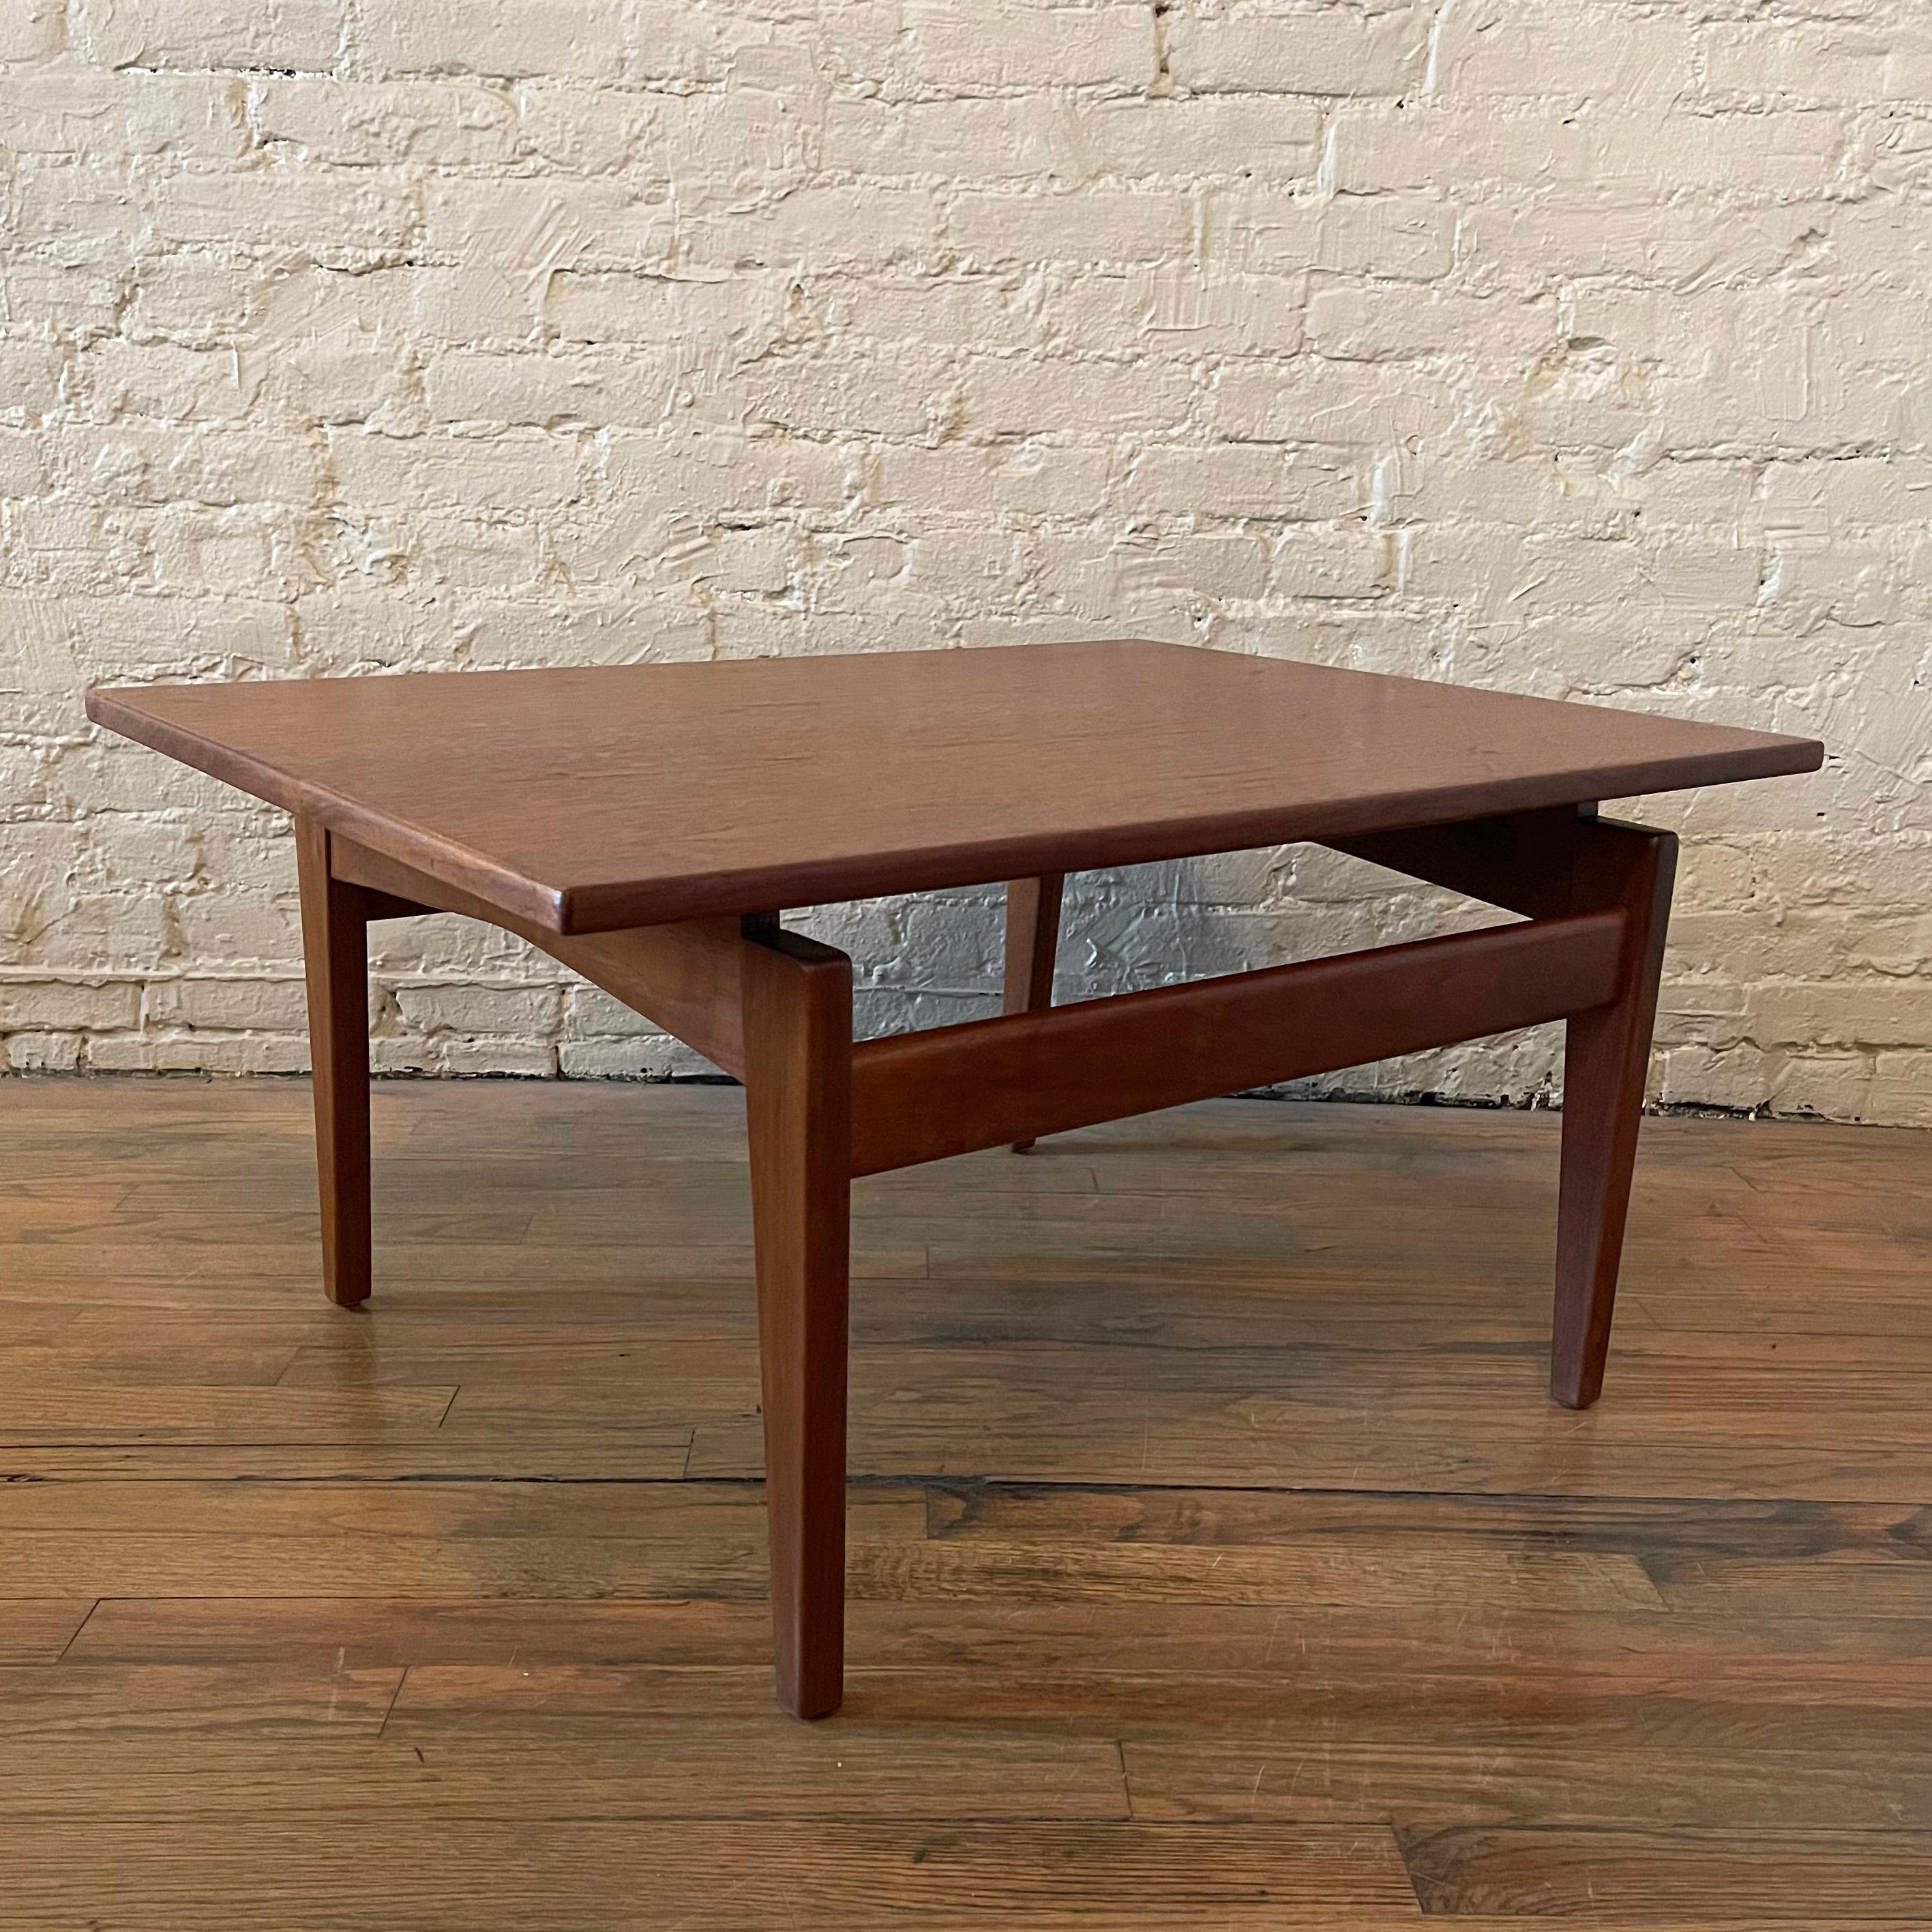 Mid-Century Modern, angular, walnut coffee or low side table by Jens Risom features a floating top with sculptural base. A matching taller side table is also available listed separately.